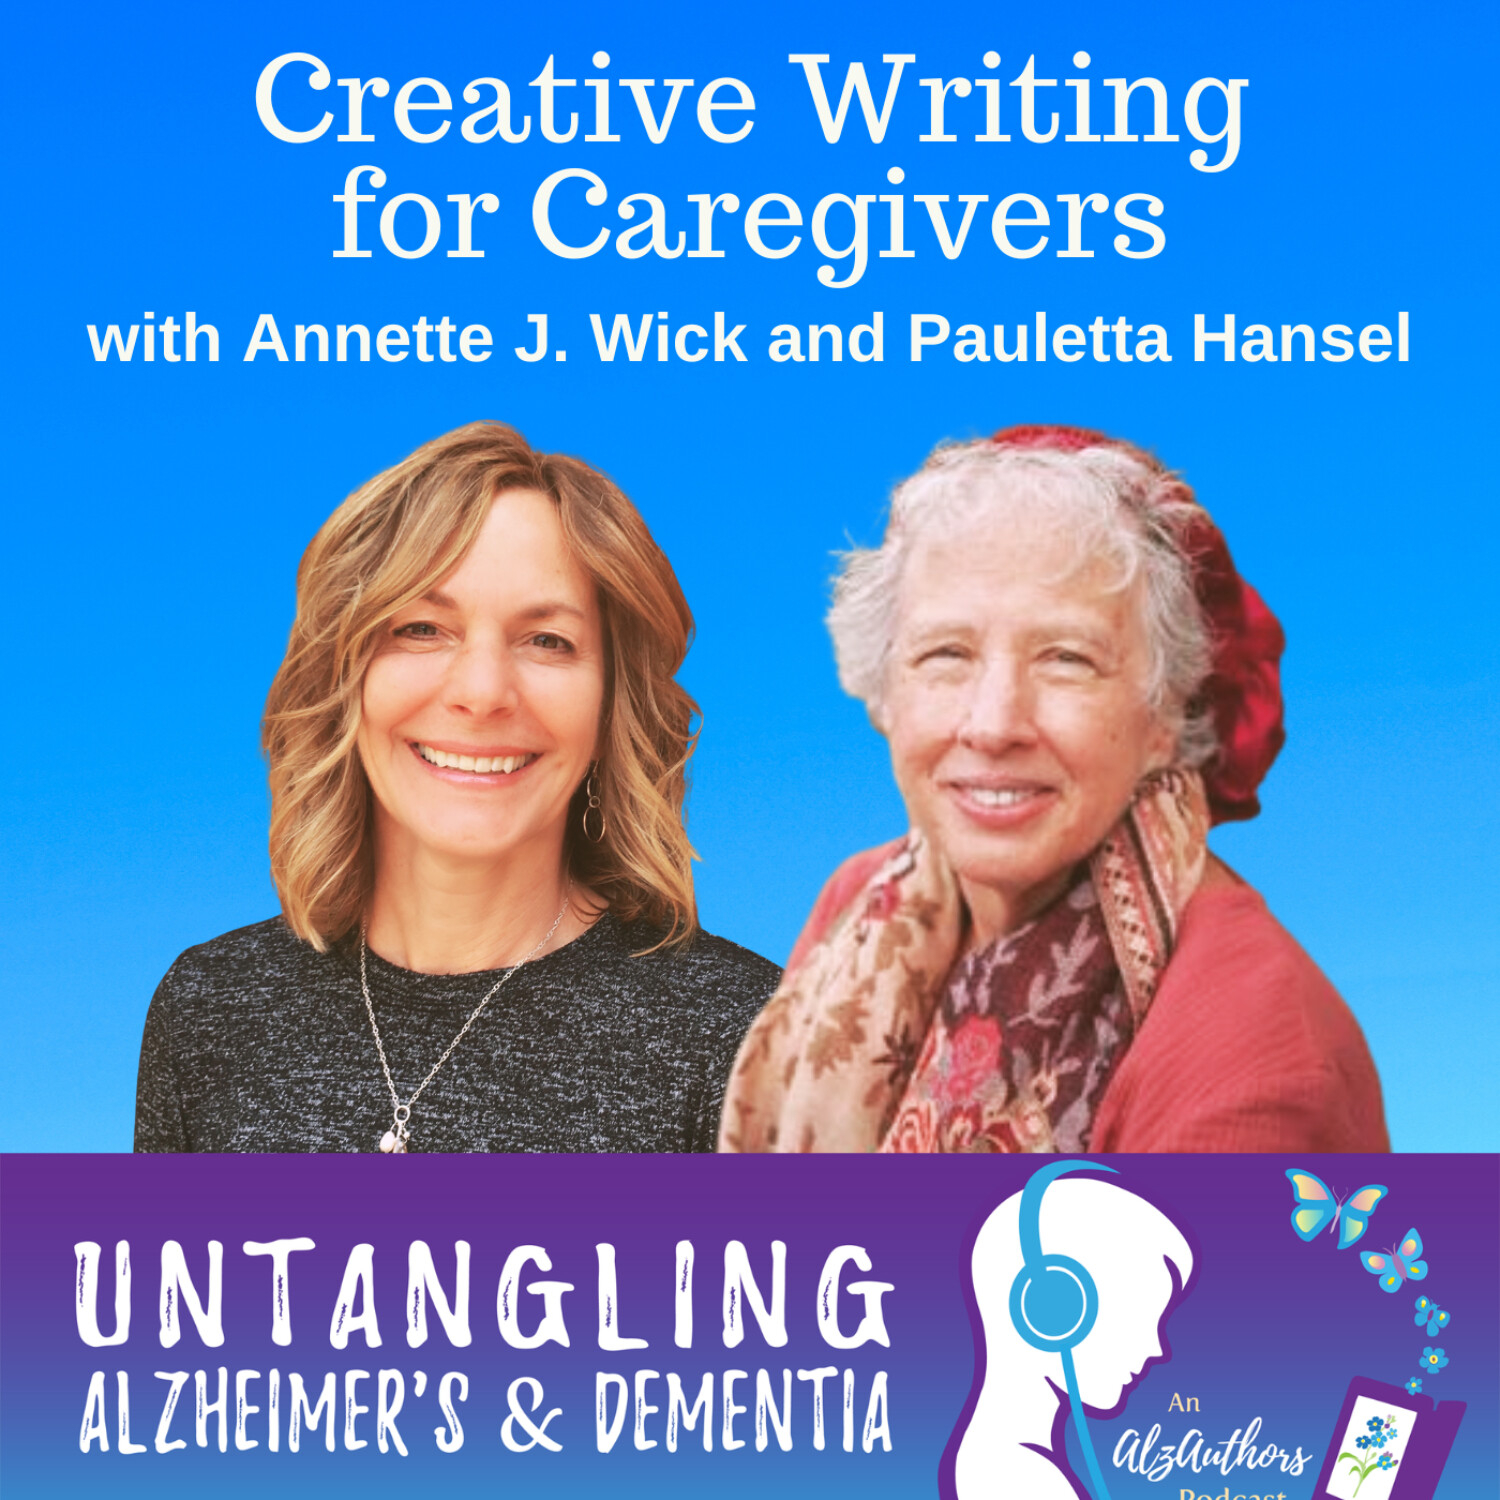 Annette Wick and Pauletta Hansel Untangle Creative Writing for Caregivers